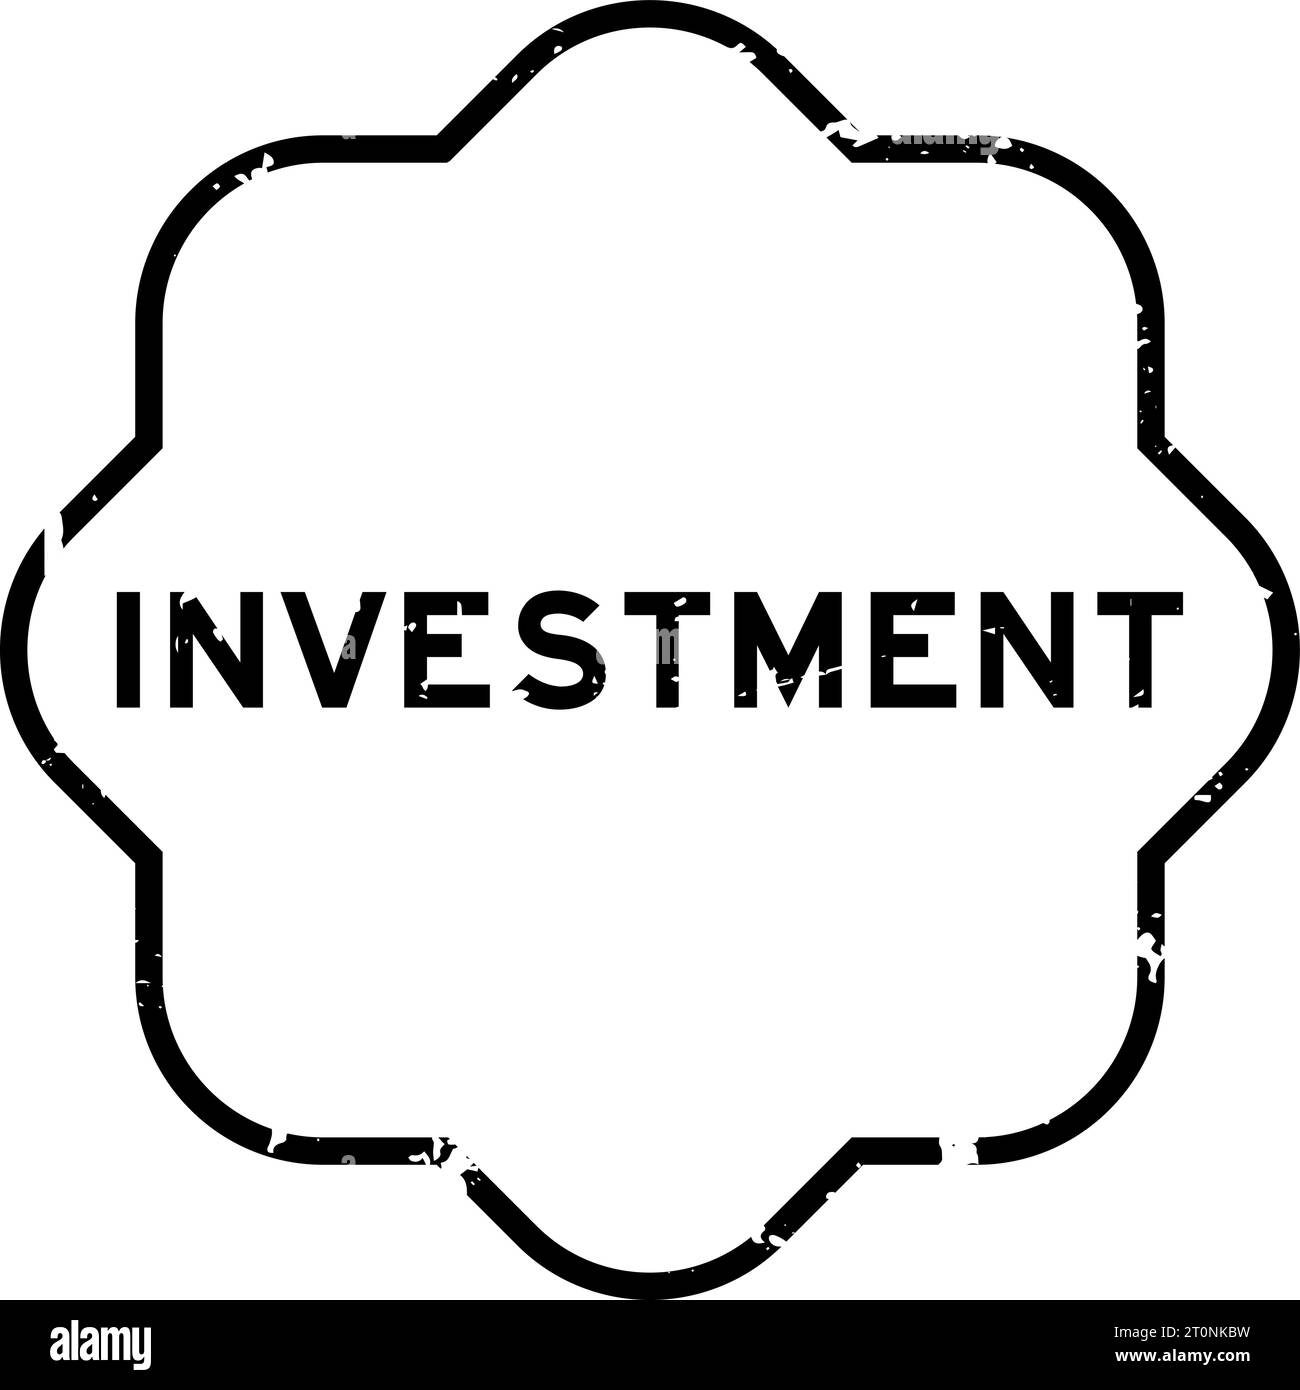 Grunge black investment word rubber seal stamp on white background Stock Vector